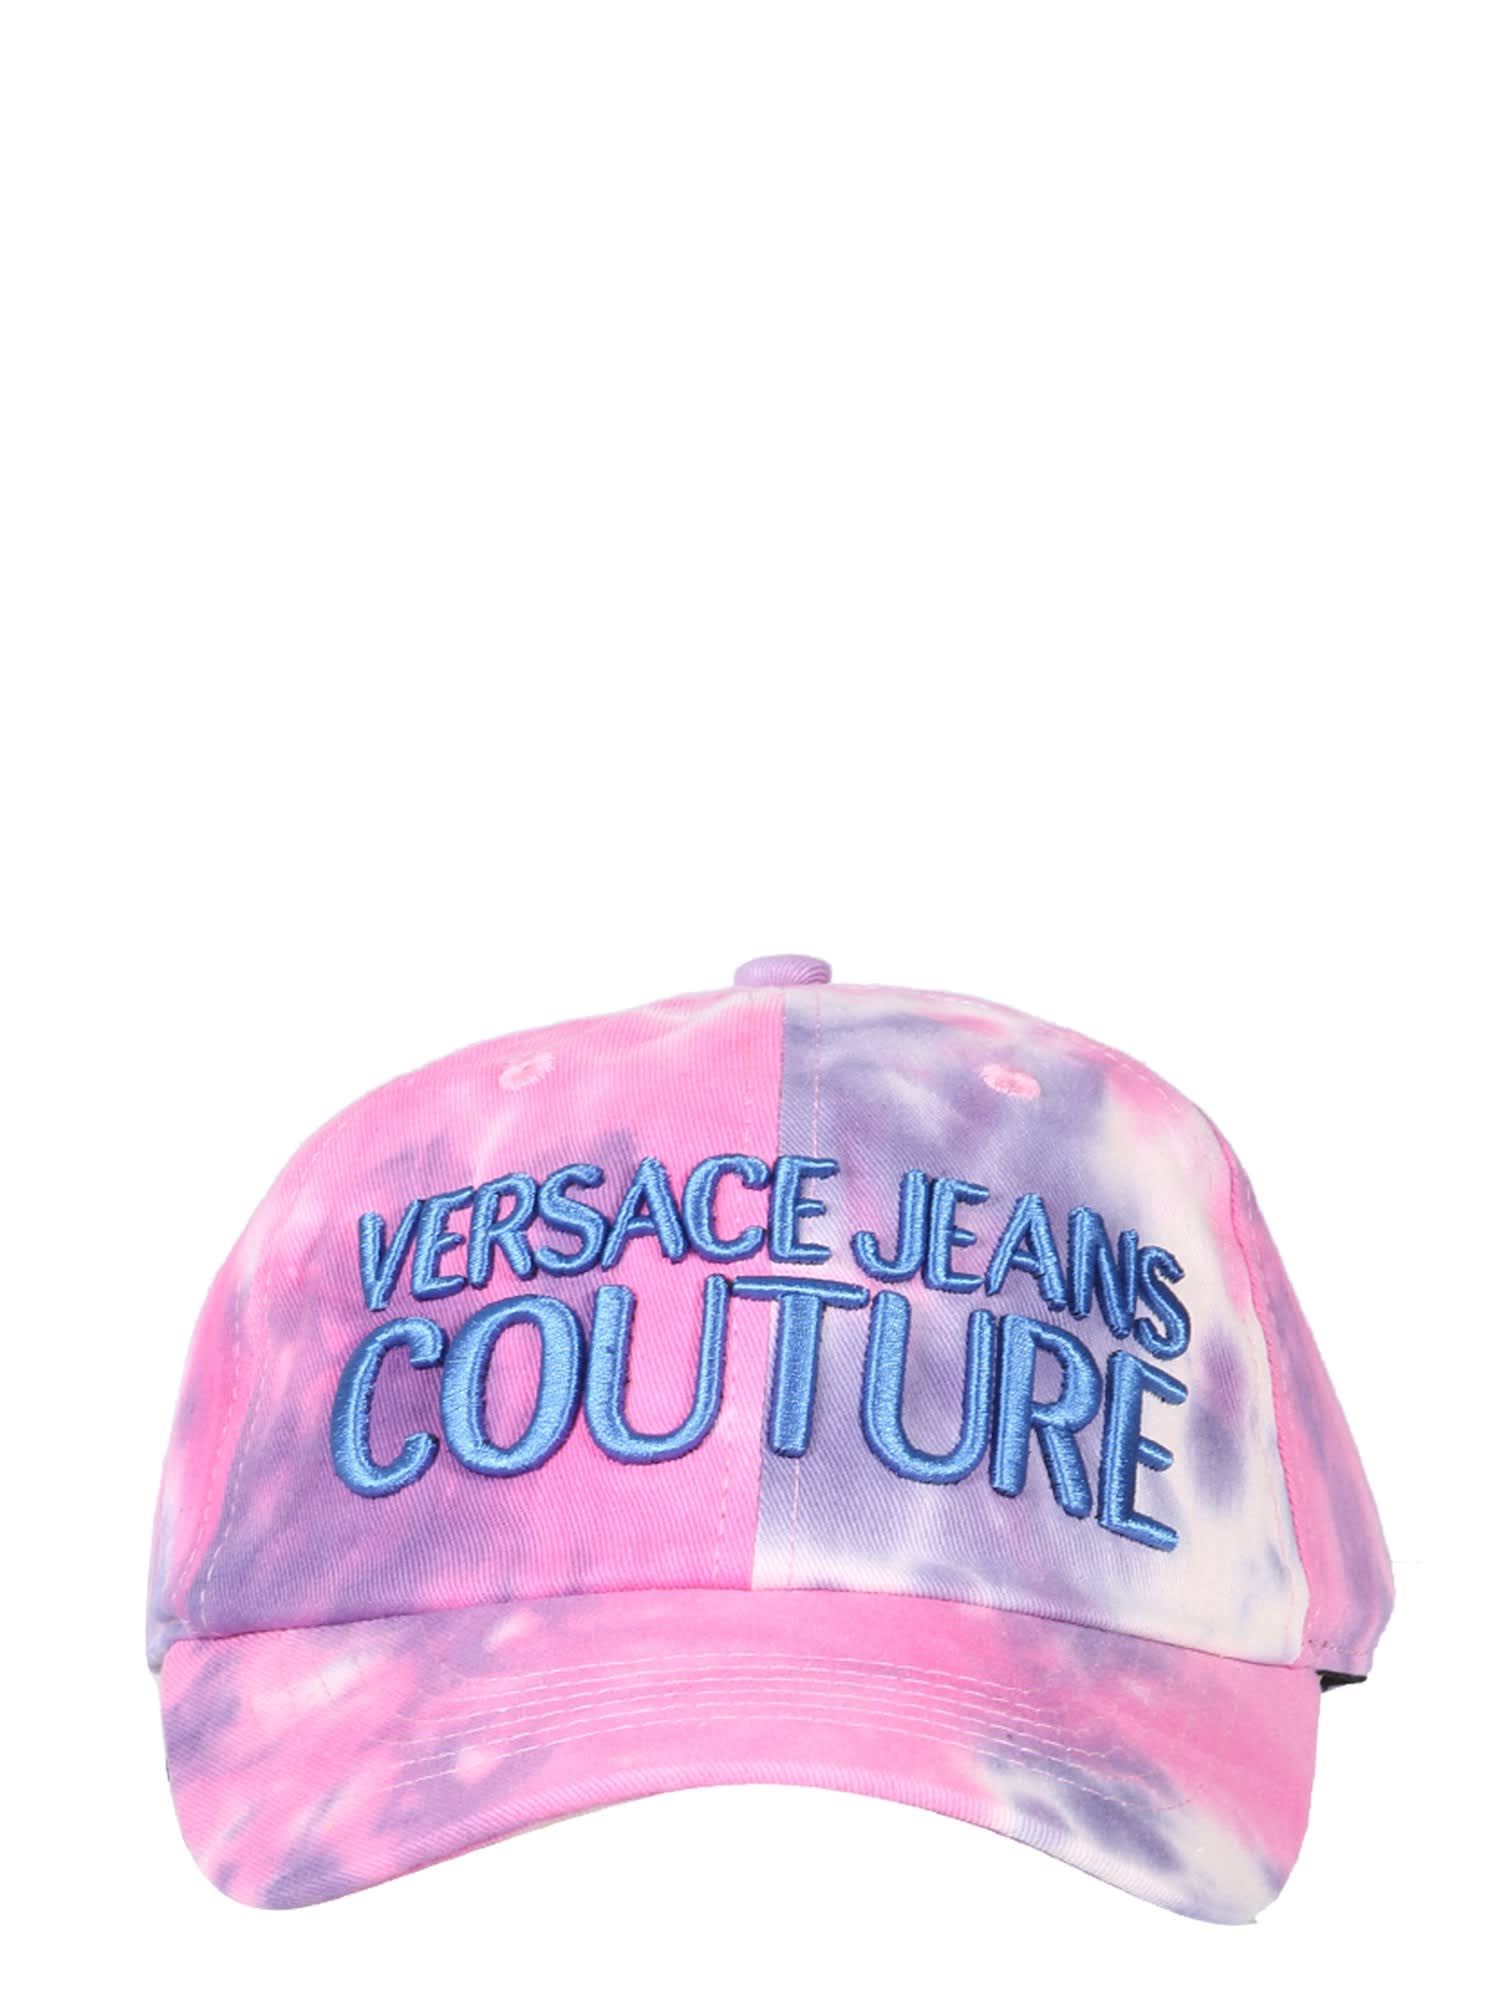 Versace Jeans Couture Logo Embroidery Baseball Hat